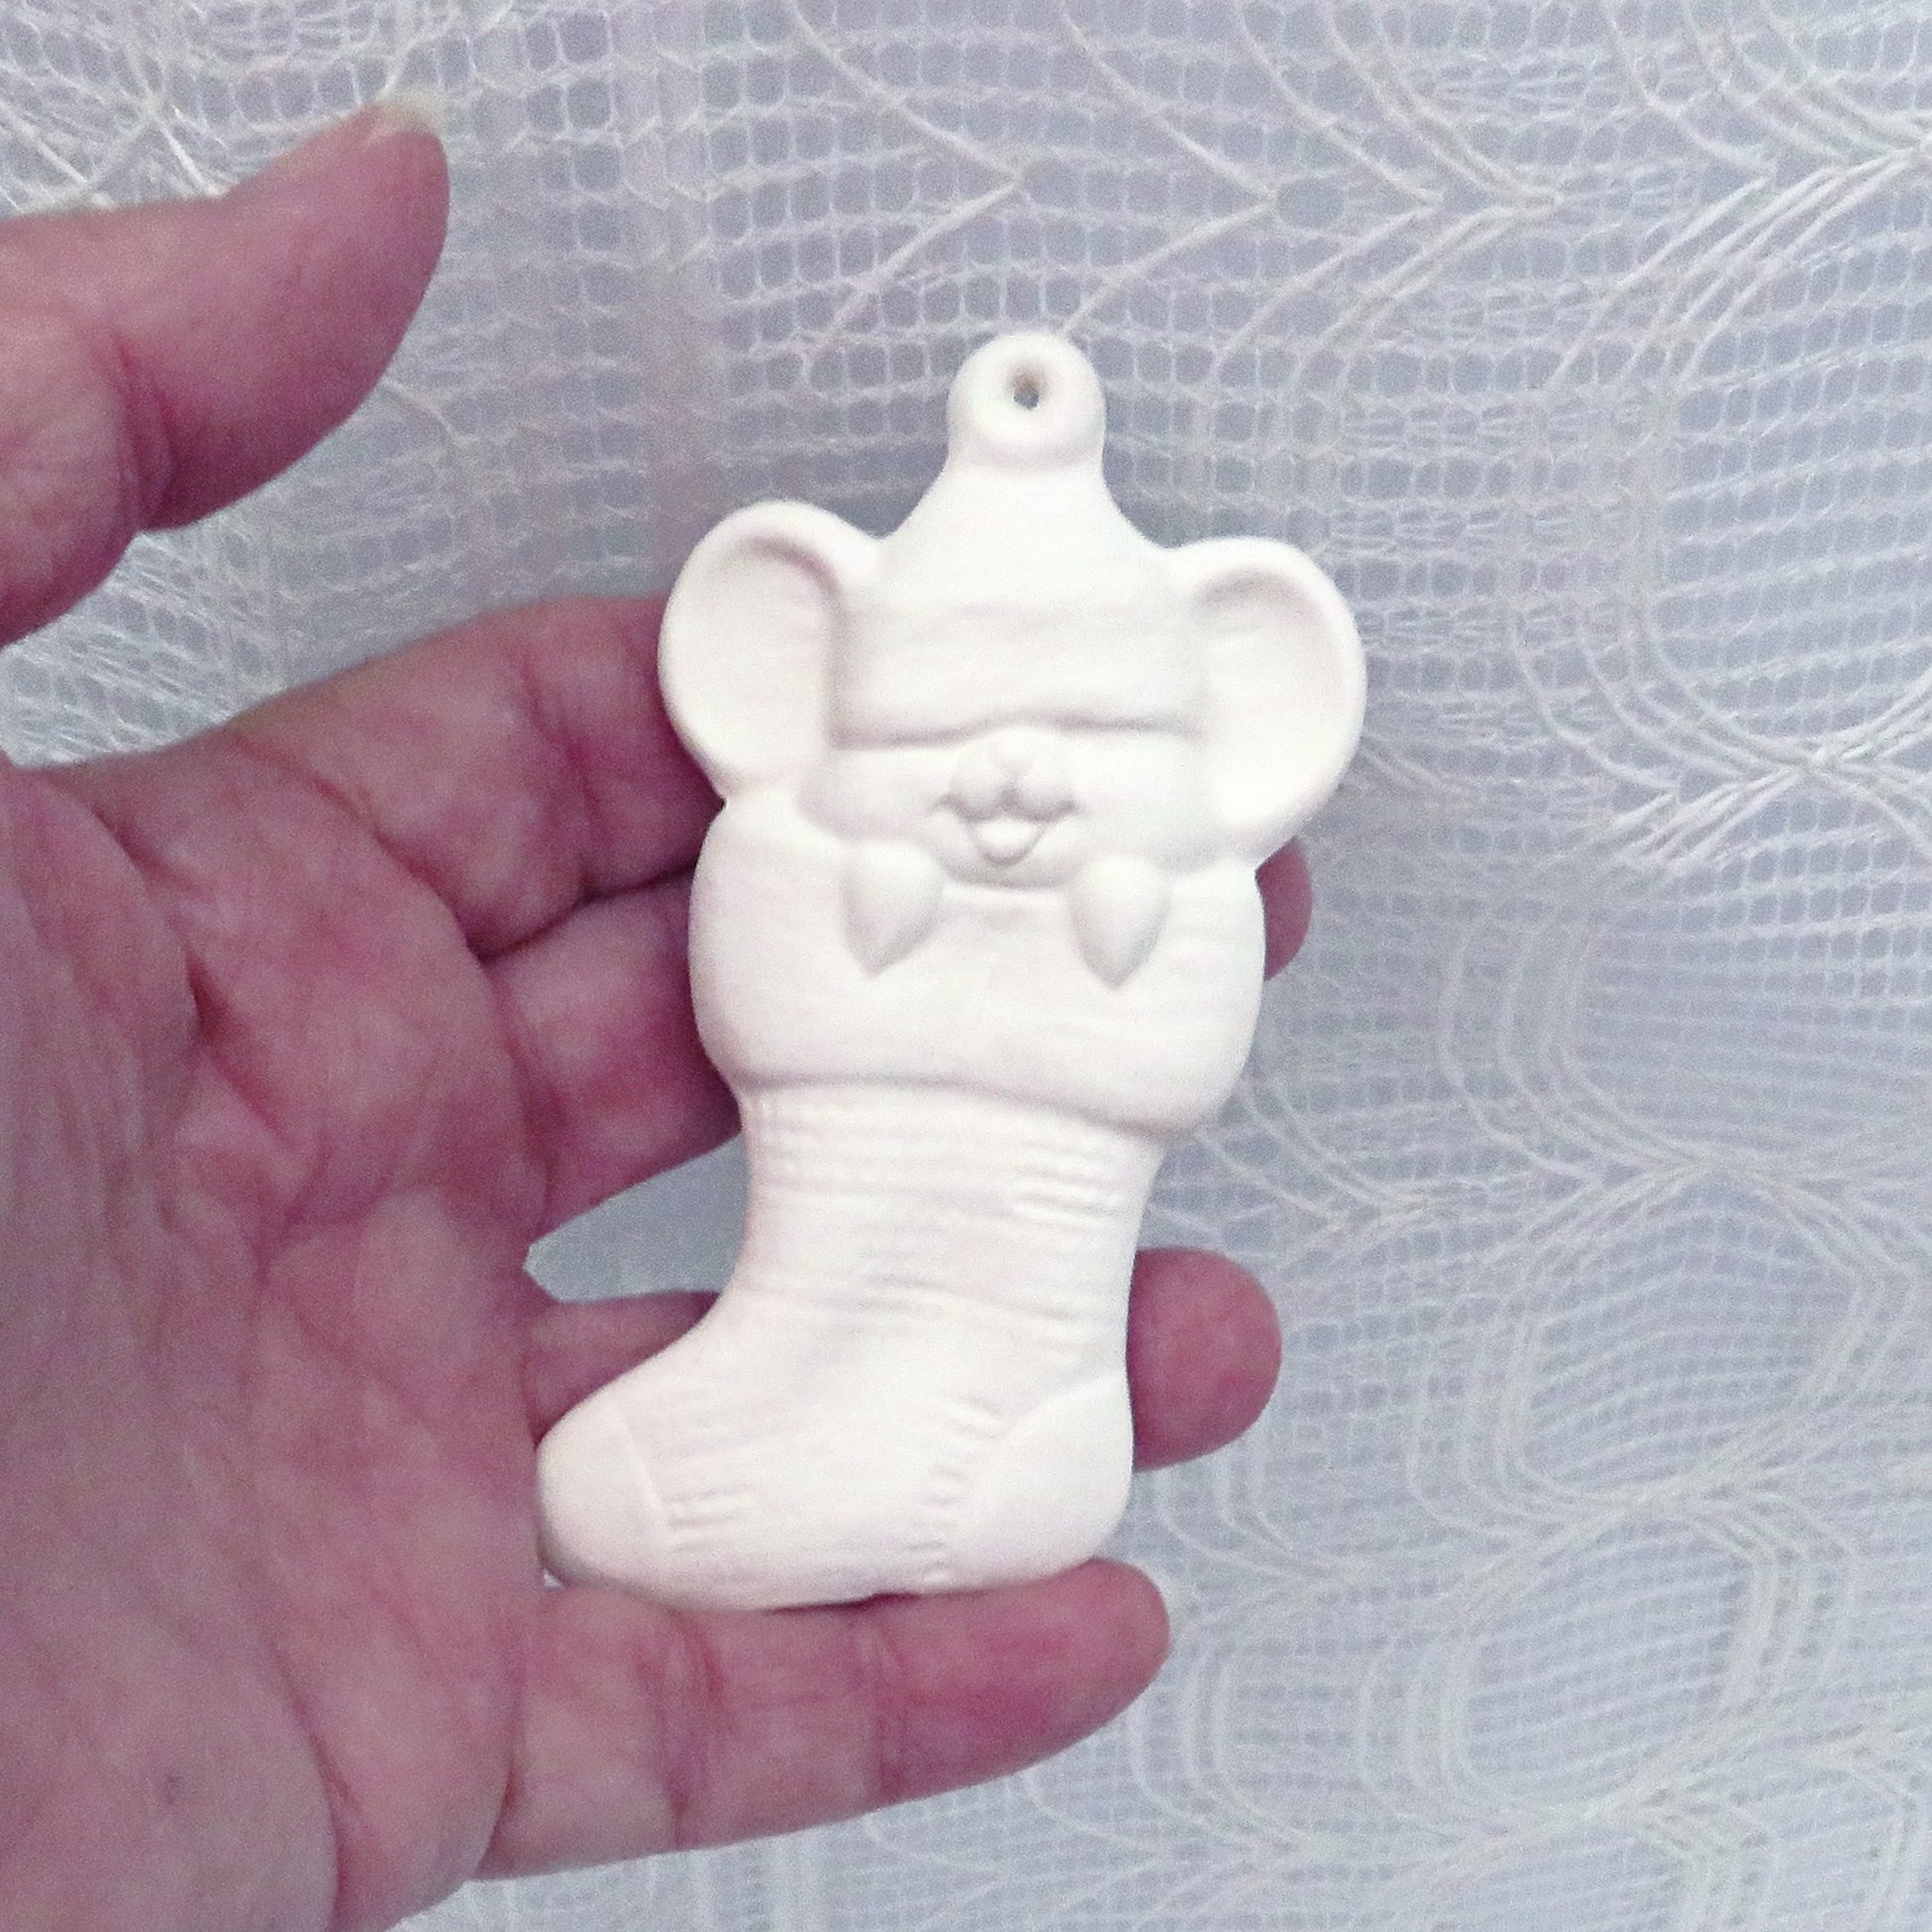 Ready to paint ceramic holiday ornament with mouse in Christmas stocking in my hand.